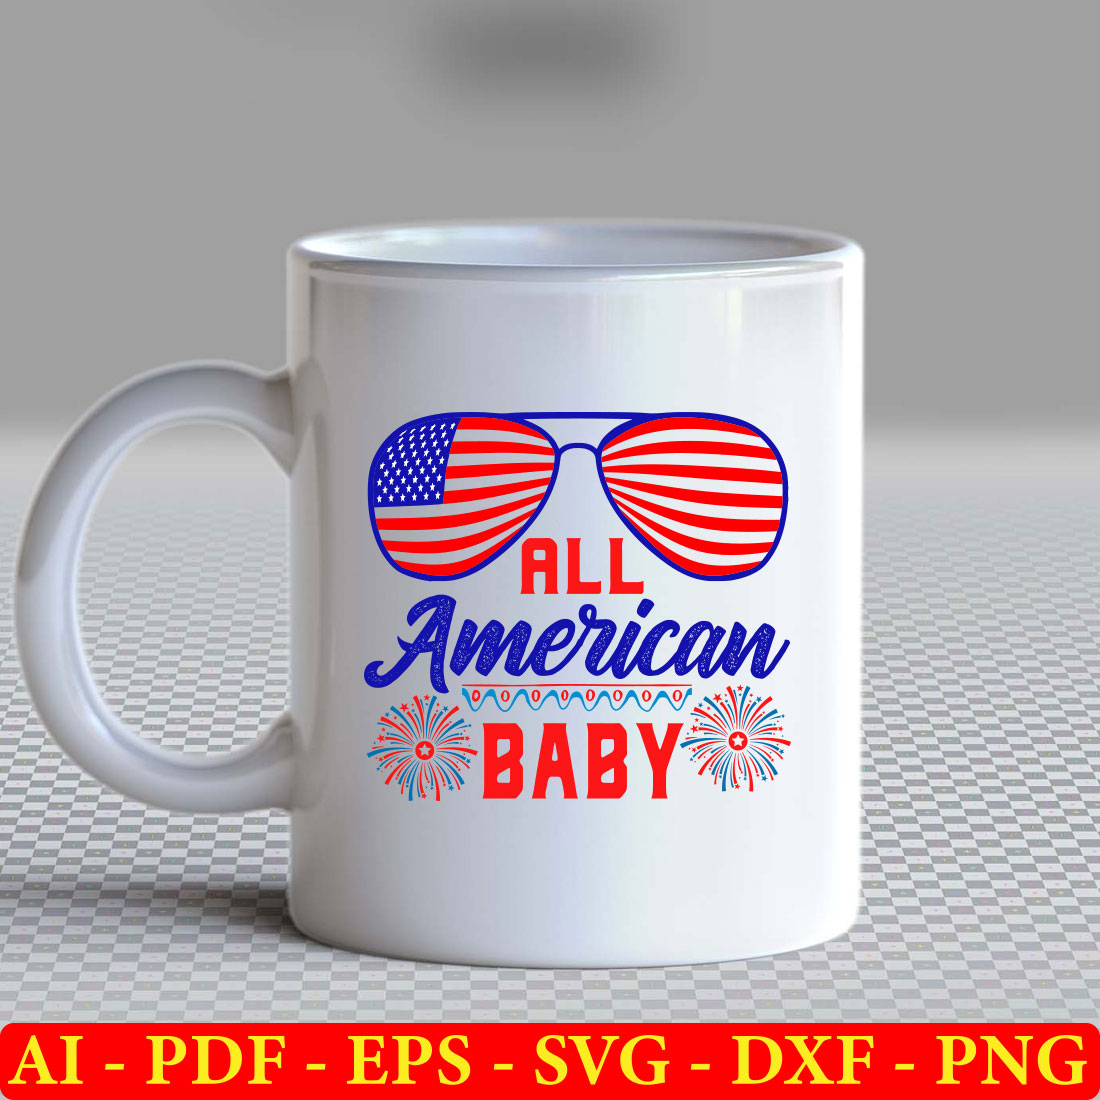 White coffee mug with the words all american baby on it.